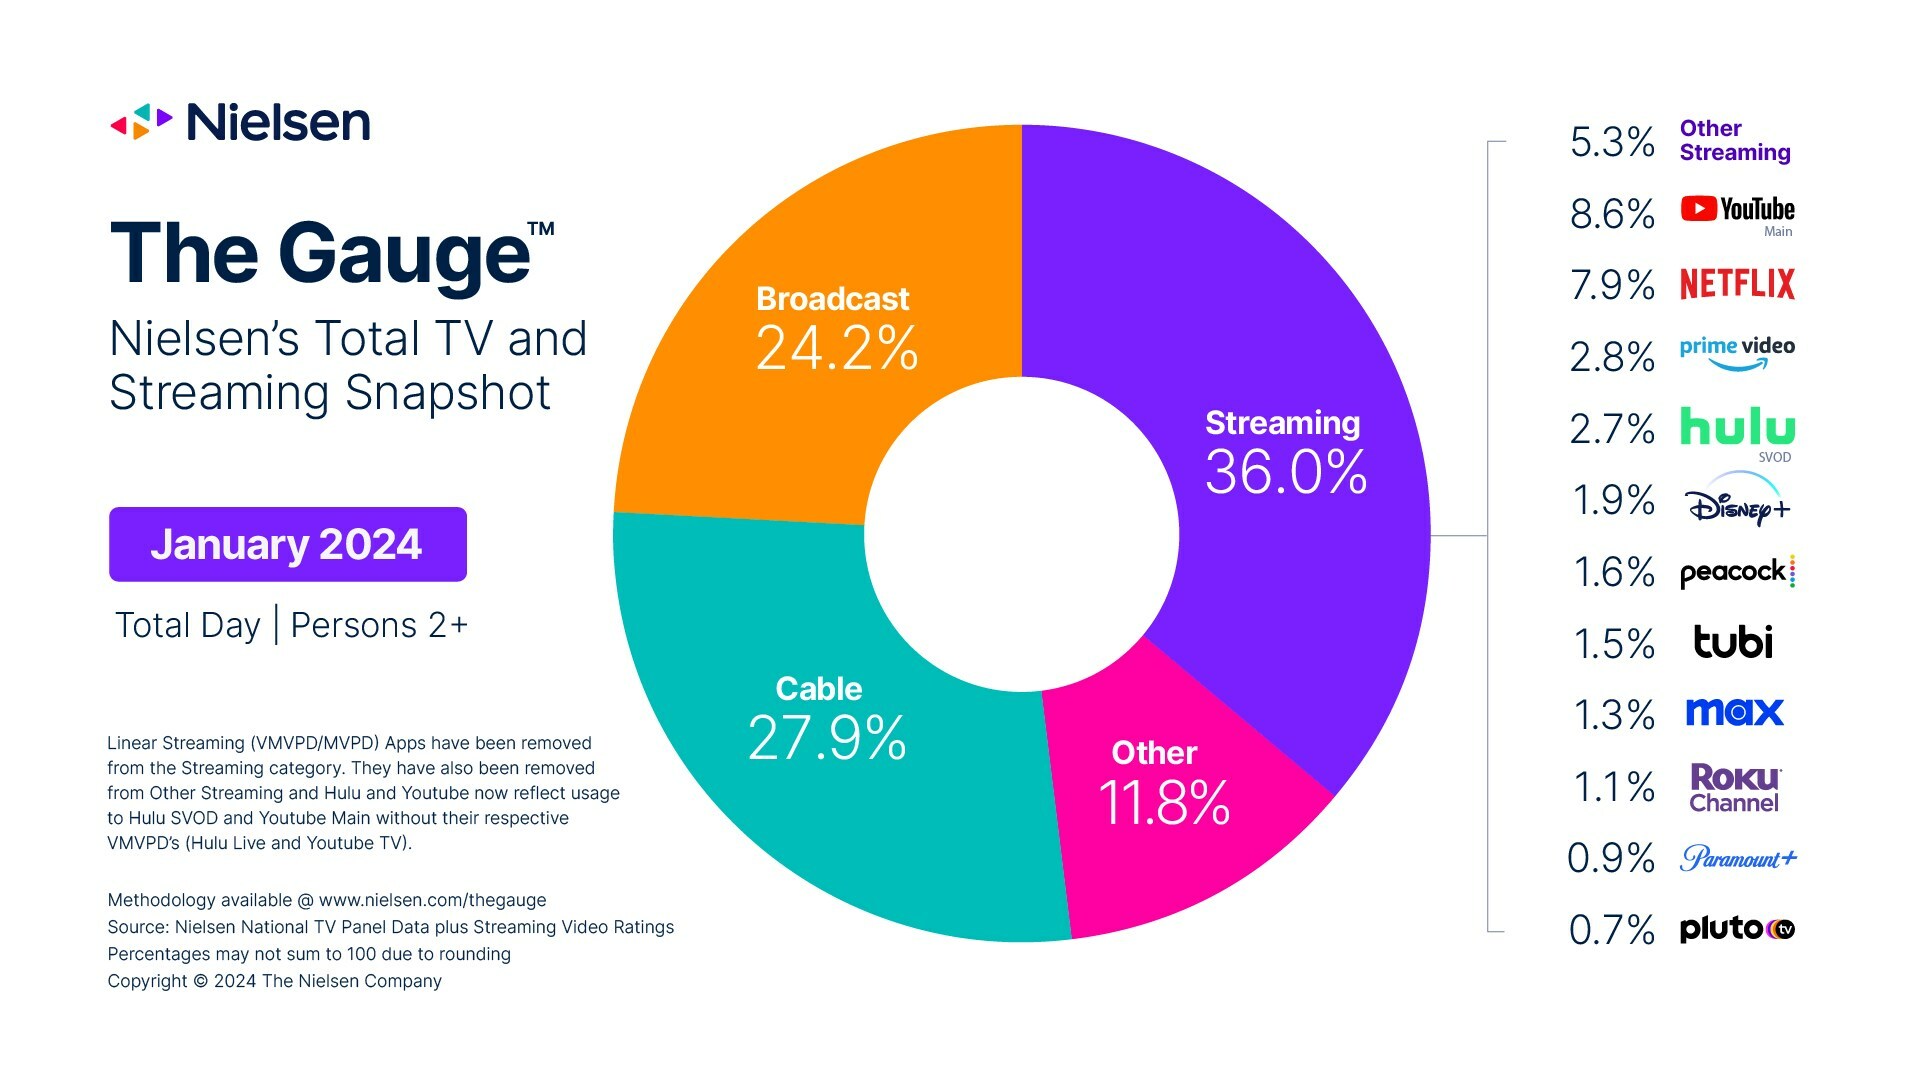 Nielsen: The Gauge - Broadcast, Cable TV, Streaming (YouTube, Netflix, Prime Video, Hulu, Disney+, Peacock, tubi, MAX, Roku Channel, Paramount+, Pluto TV, Other streaming), Other - January 2024